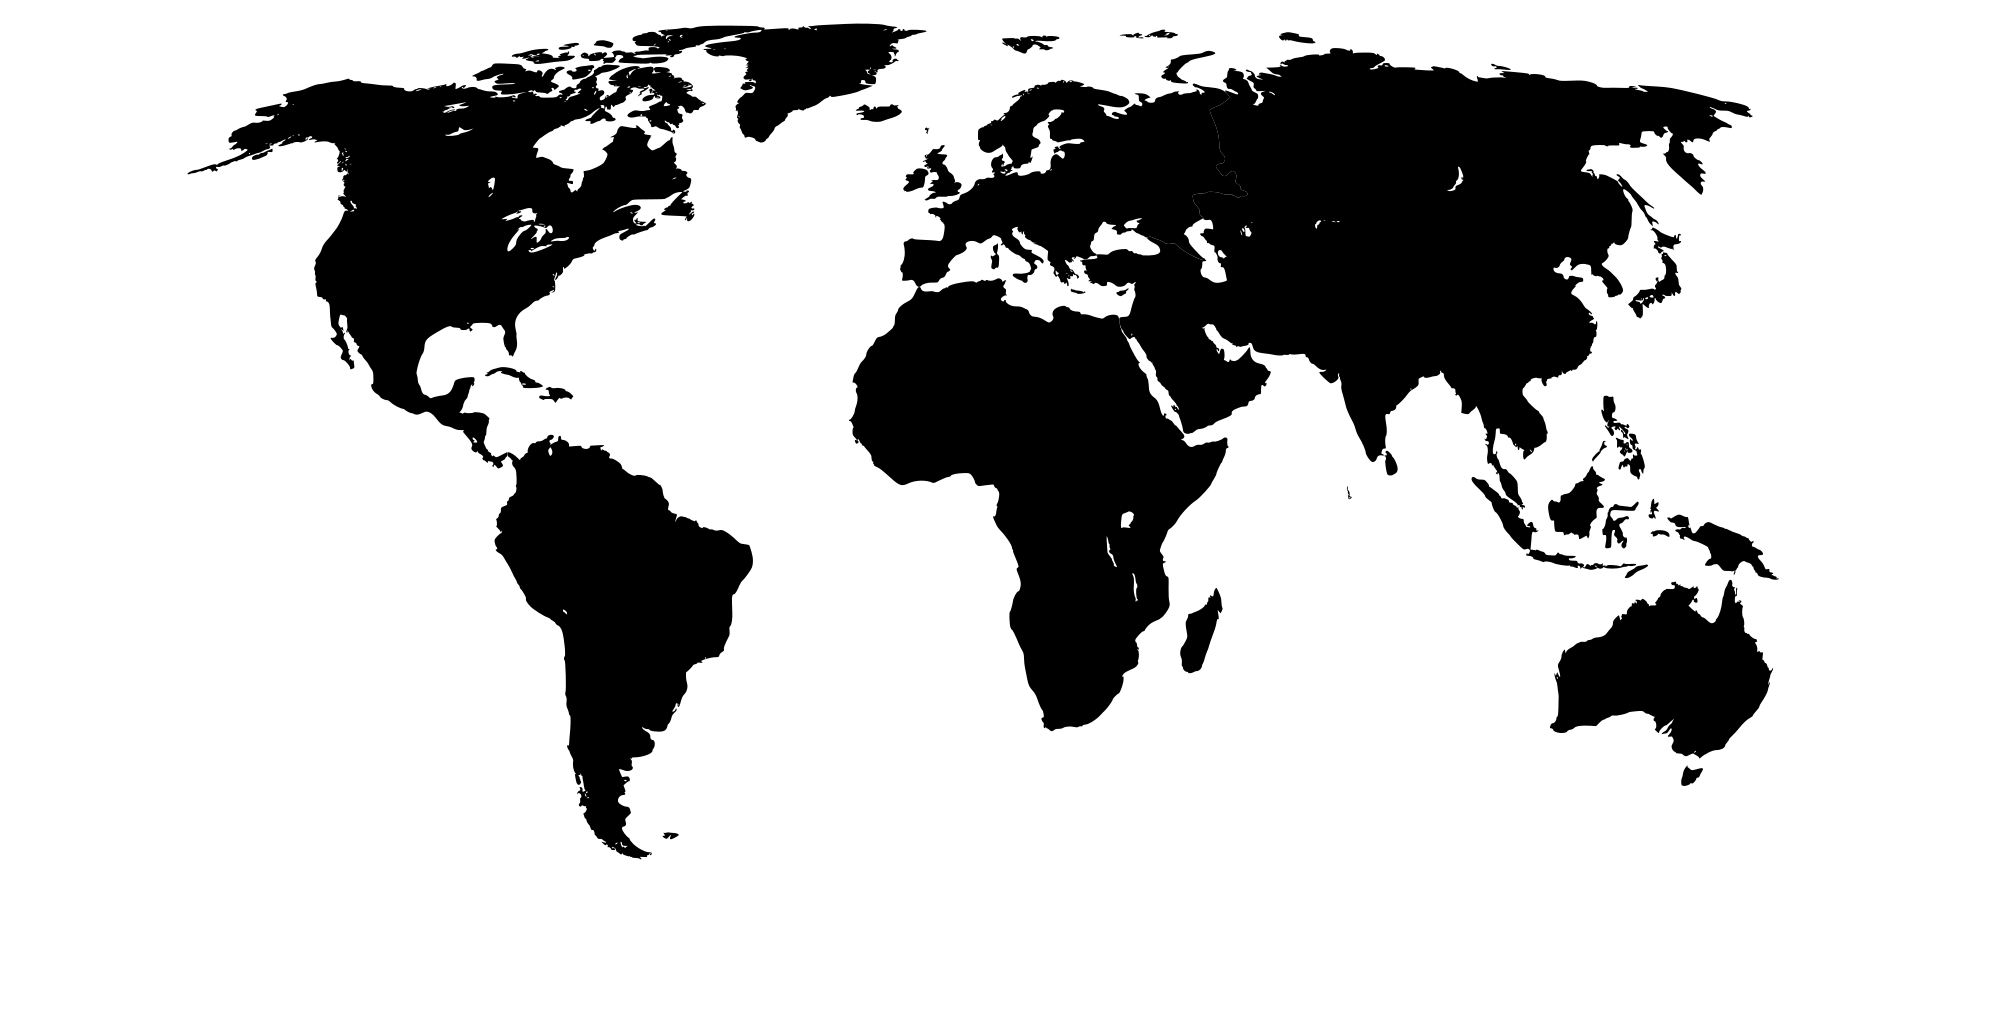 World Map With Black And White Outline,Blank Map Of World Continents